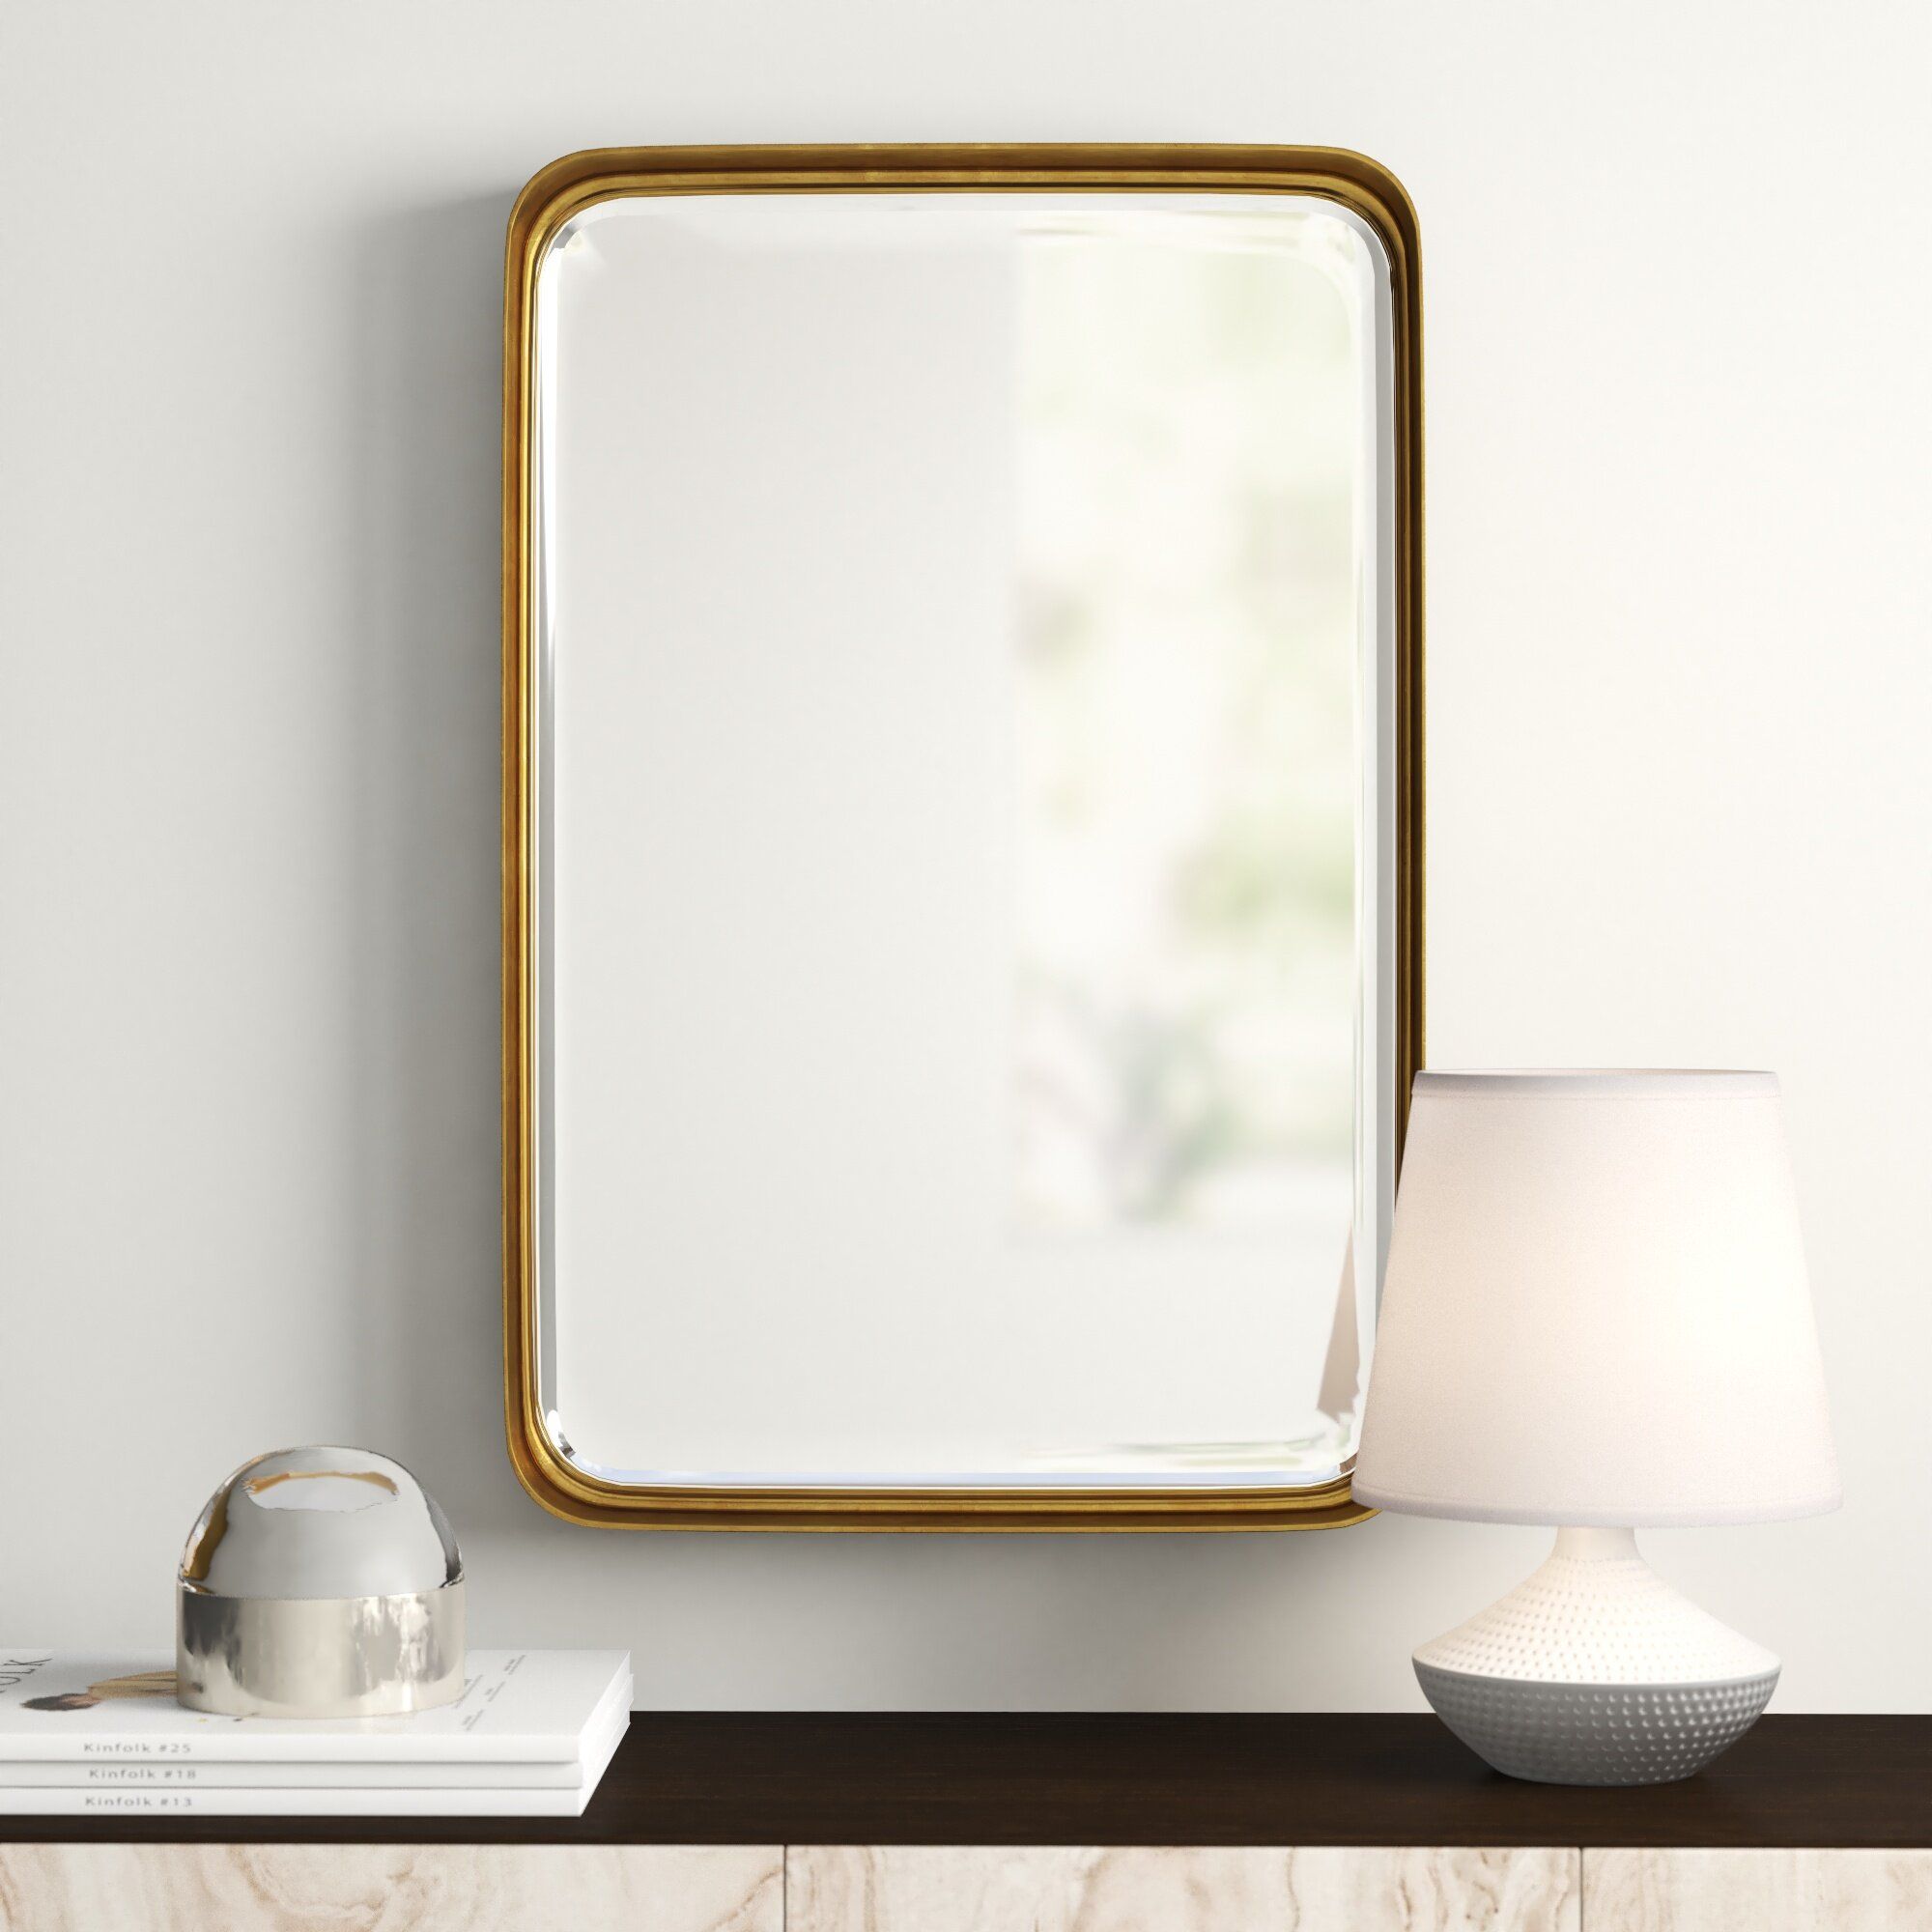 Lugo Rectangle Accent Mirror Intended For Peetz Modern Rustic Accent Mirrors (View 12 of 20)